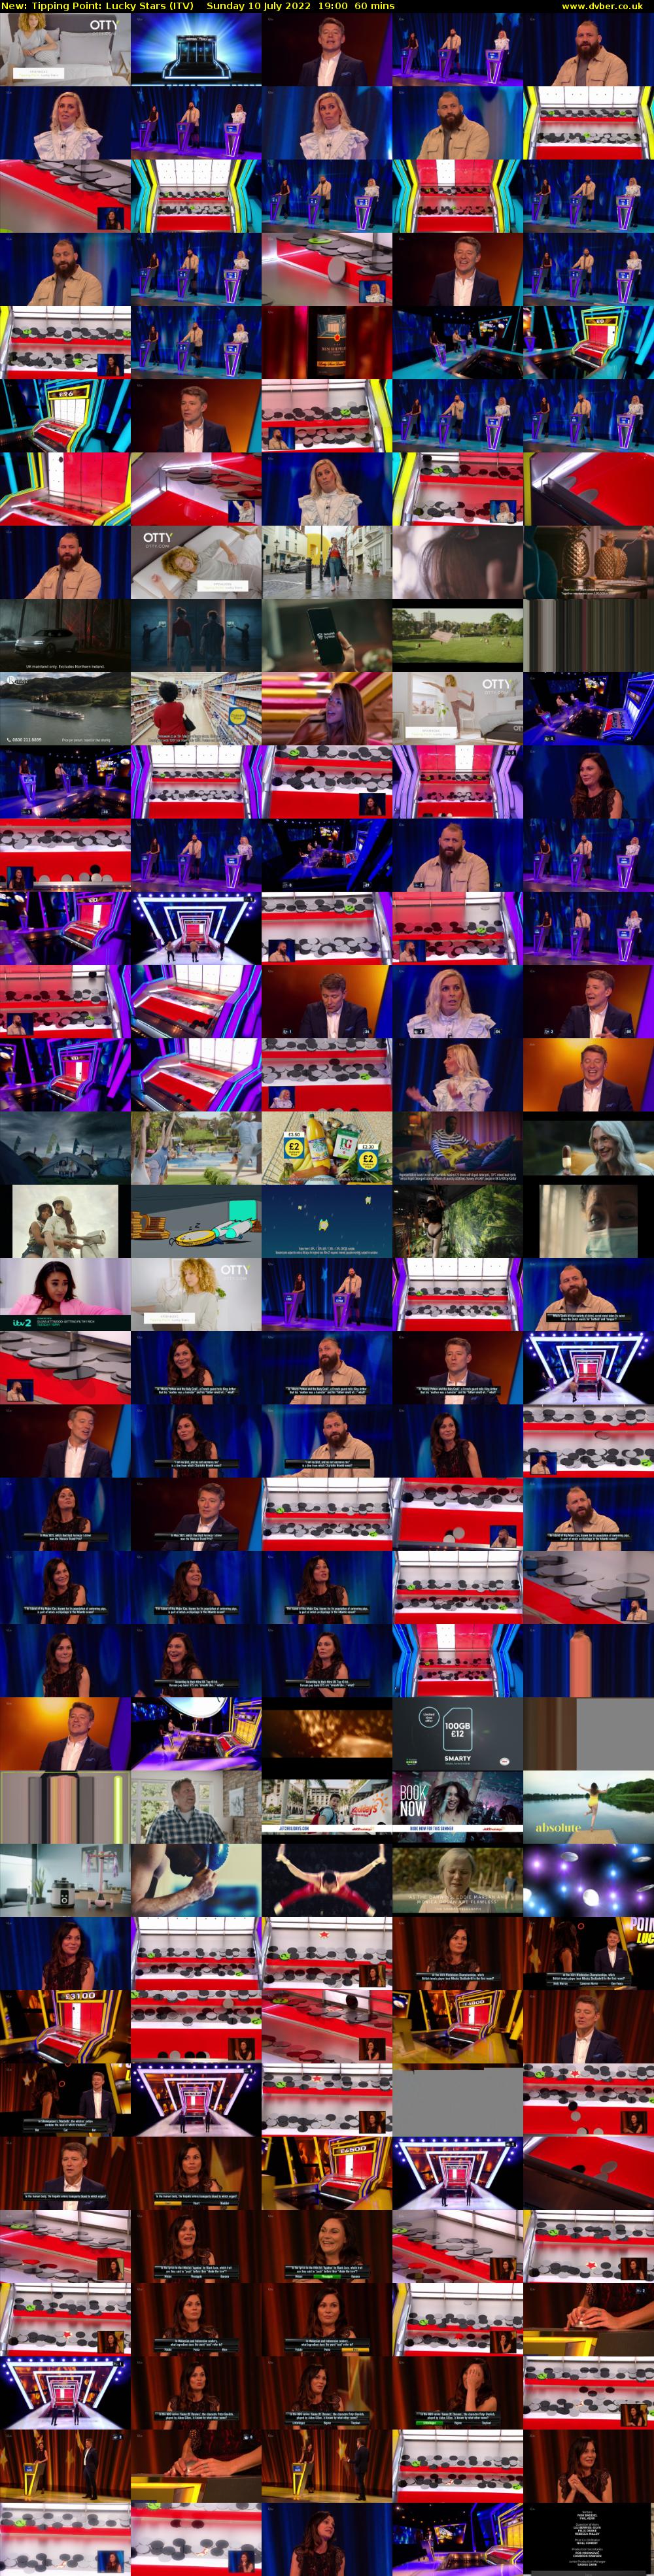 Tipping Point: Lucky Stars (ITV) Sunday 10 July 2022 19:00 - 20:00